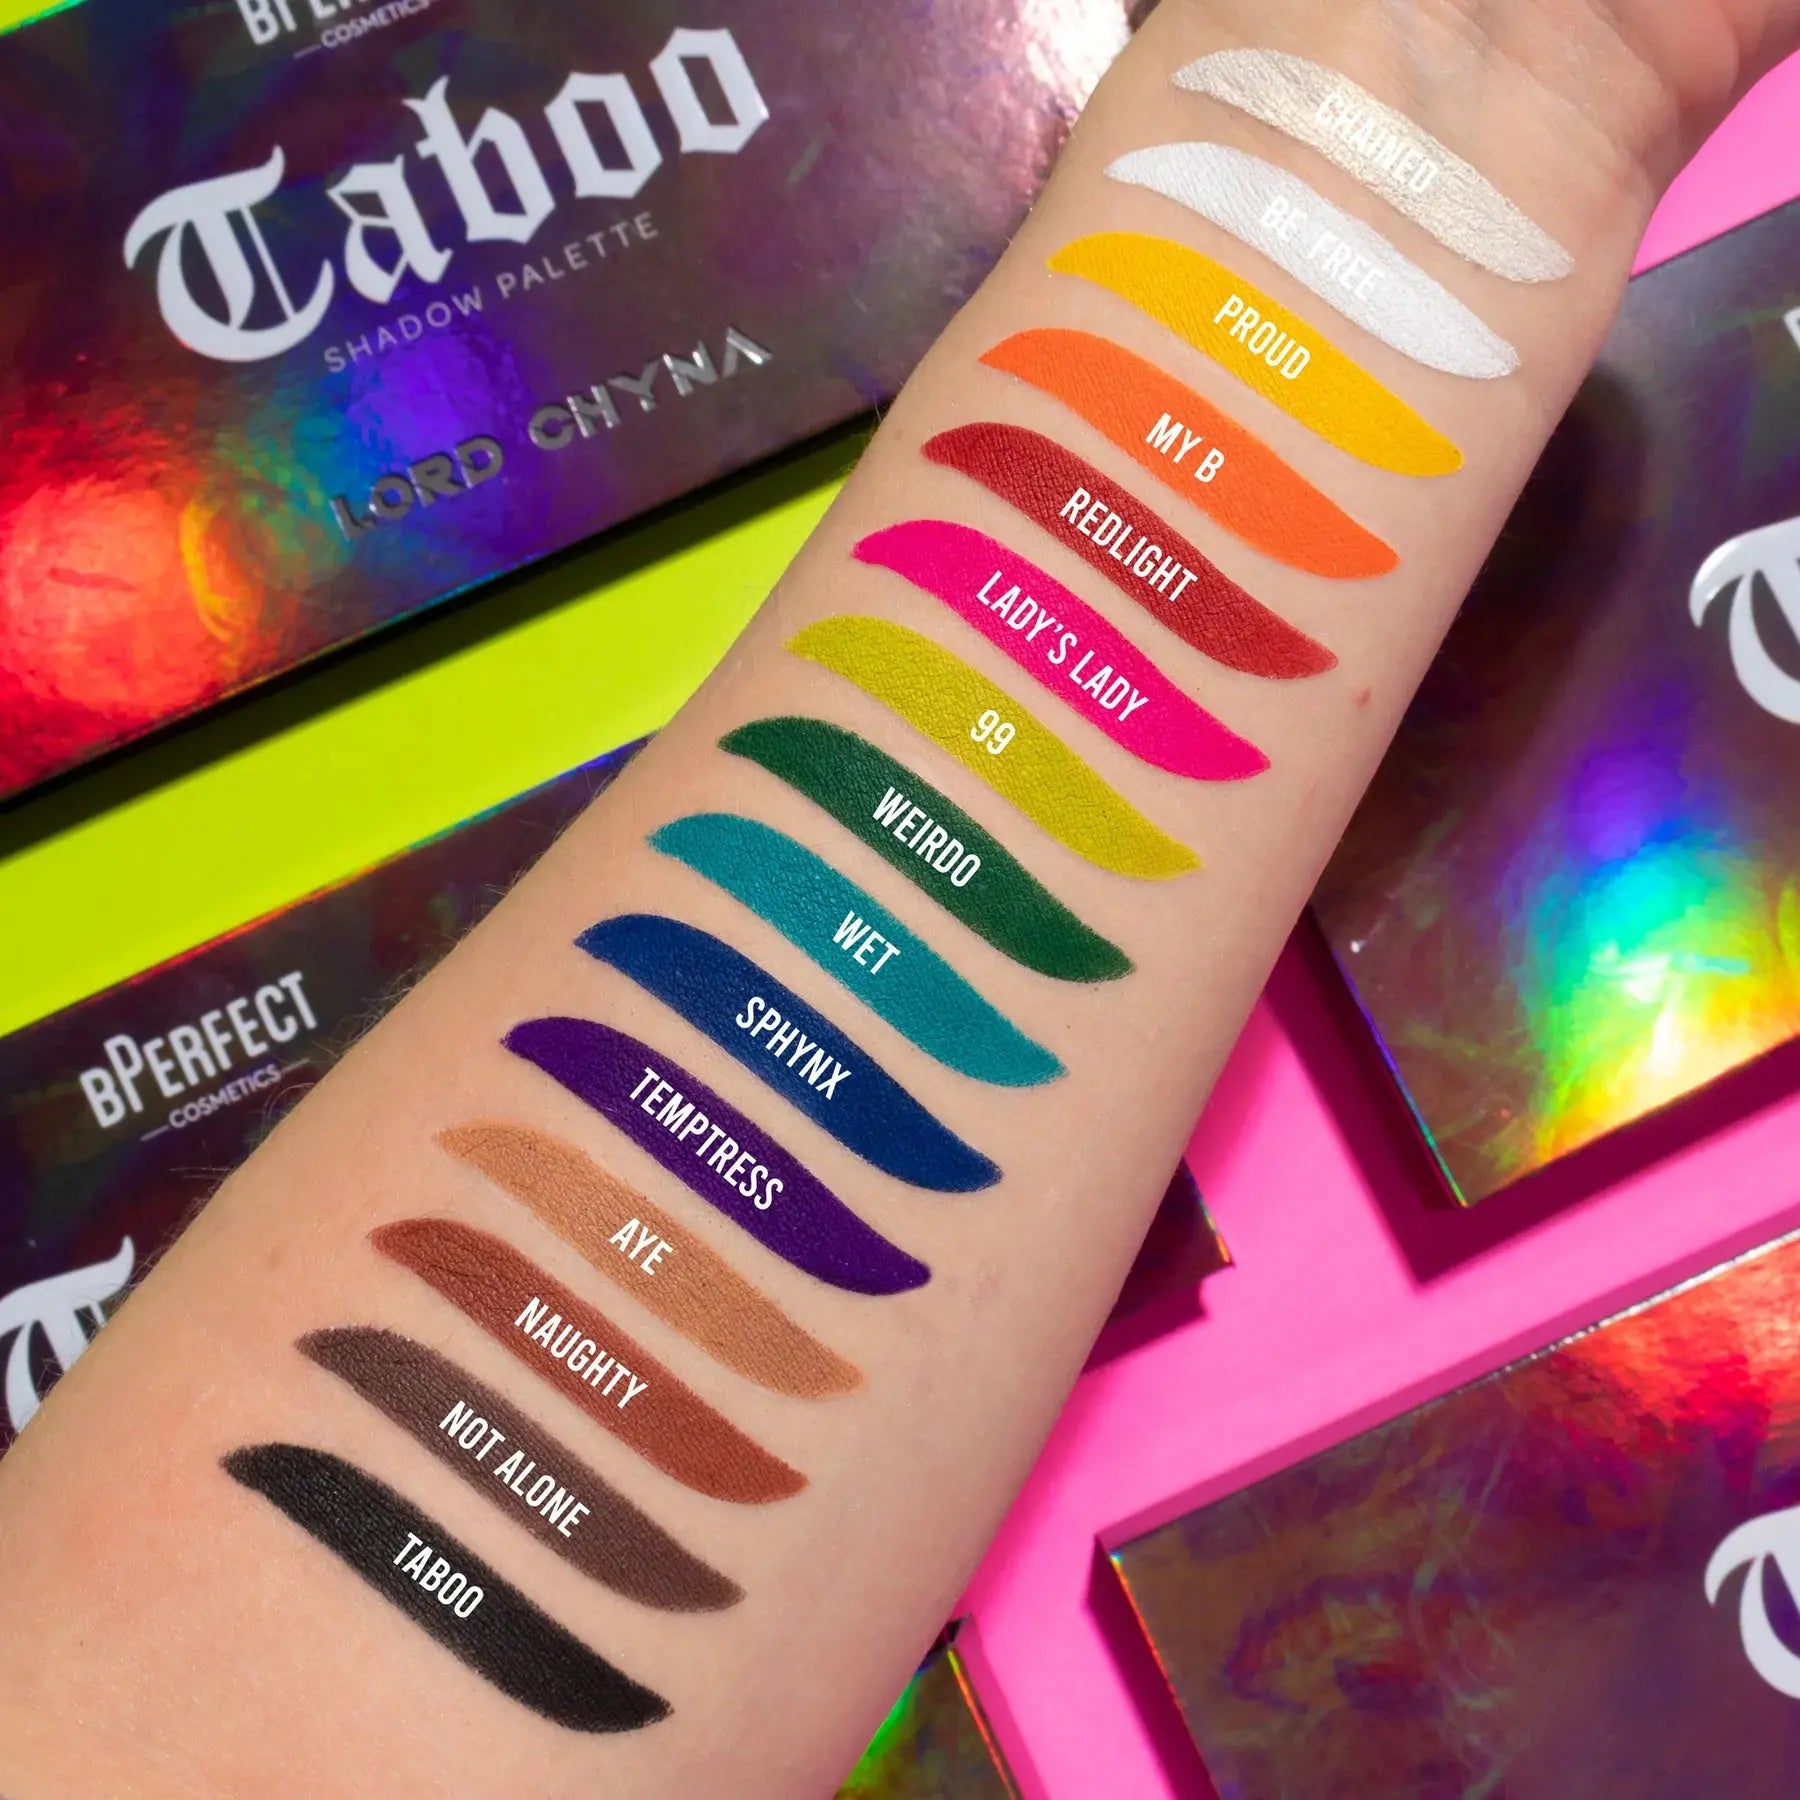 Lord Chyna Taboo Palette - BPerfect JosikaBeauty